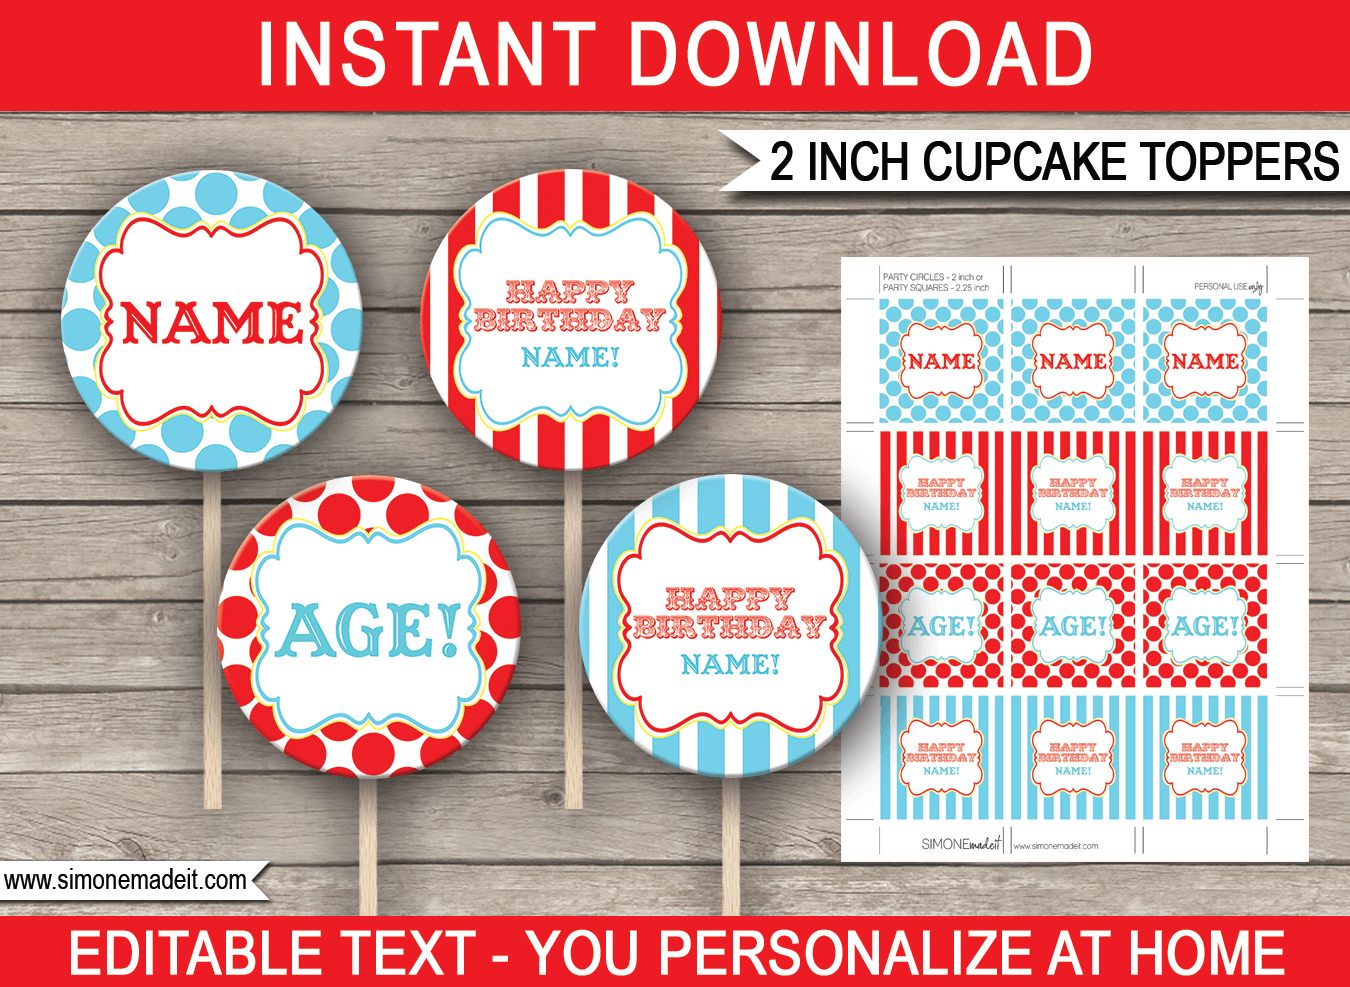 Printable Circus Cupcake Toppers Template | Circus or Carnival Theme Decorations | 2 inch | Gift Tags | INSTANT DOWNLOAD via simonemadeit.com